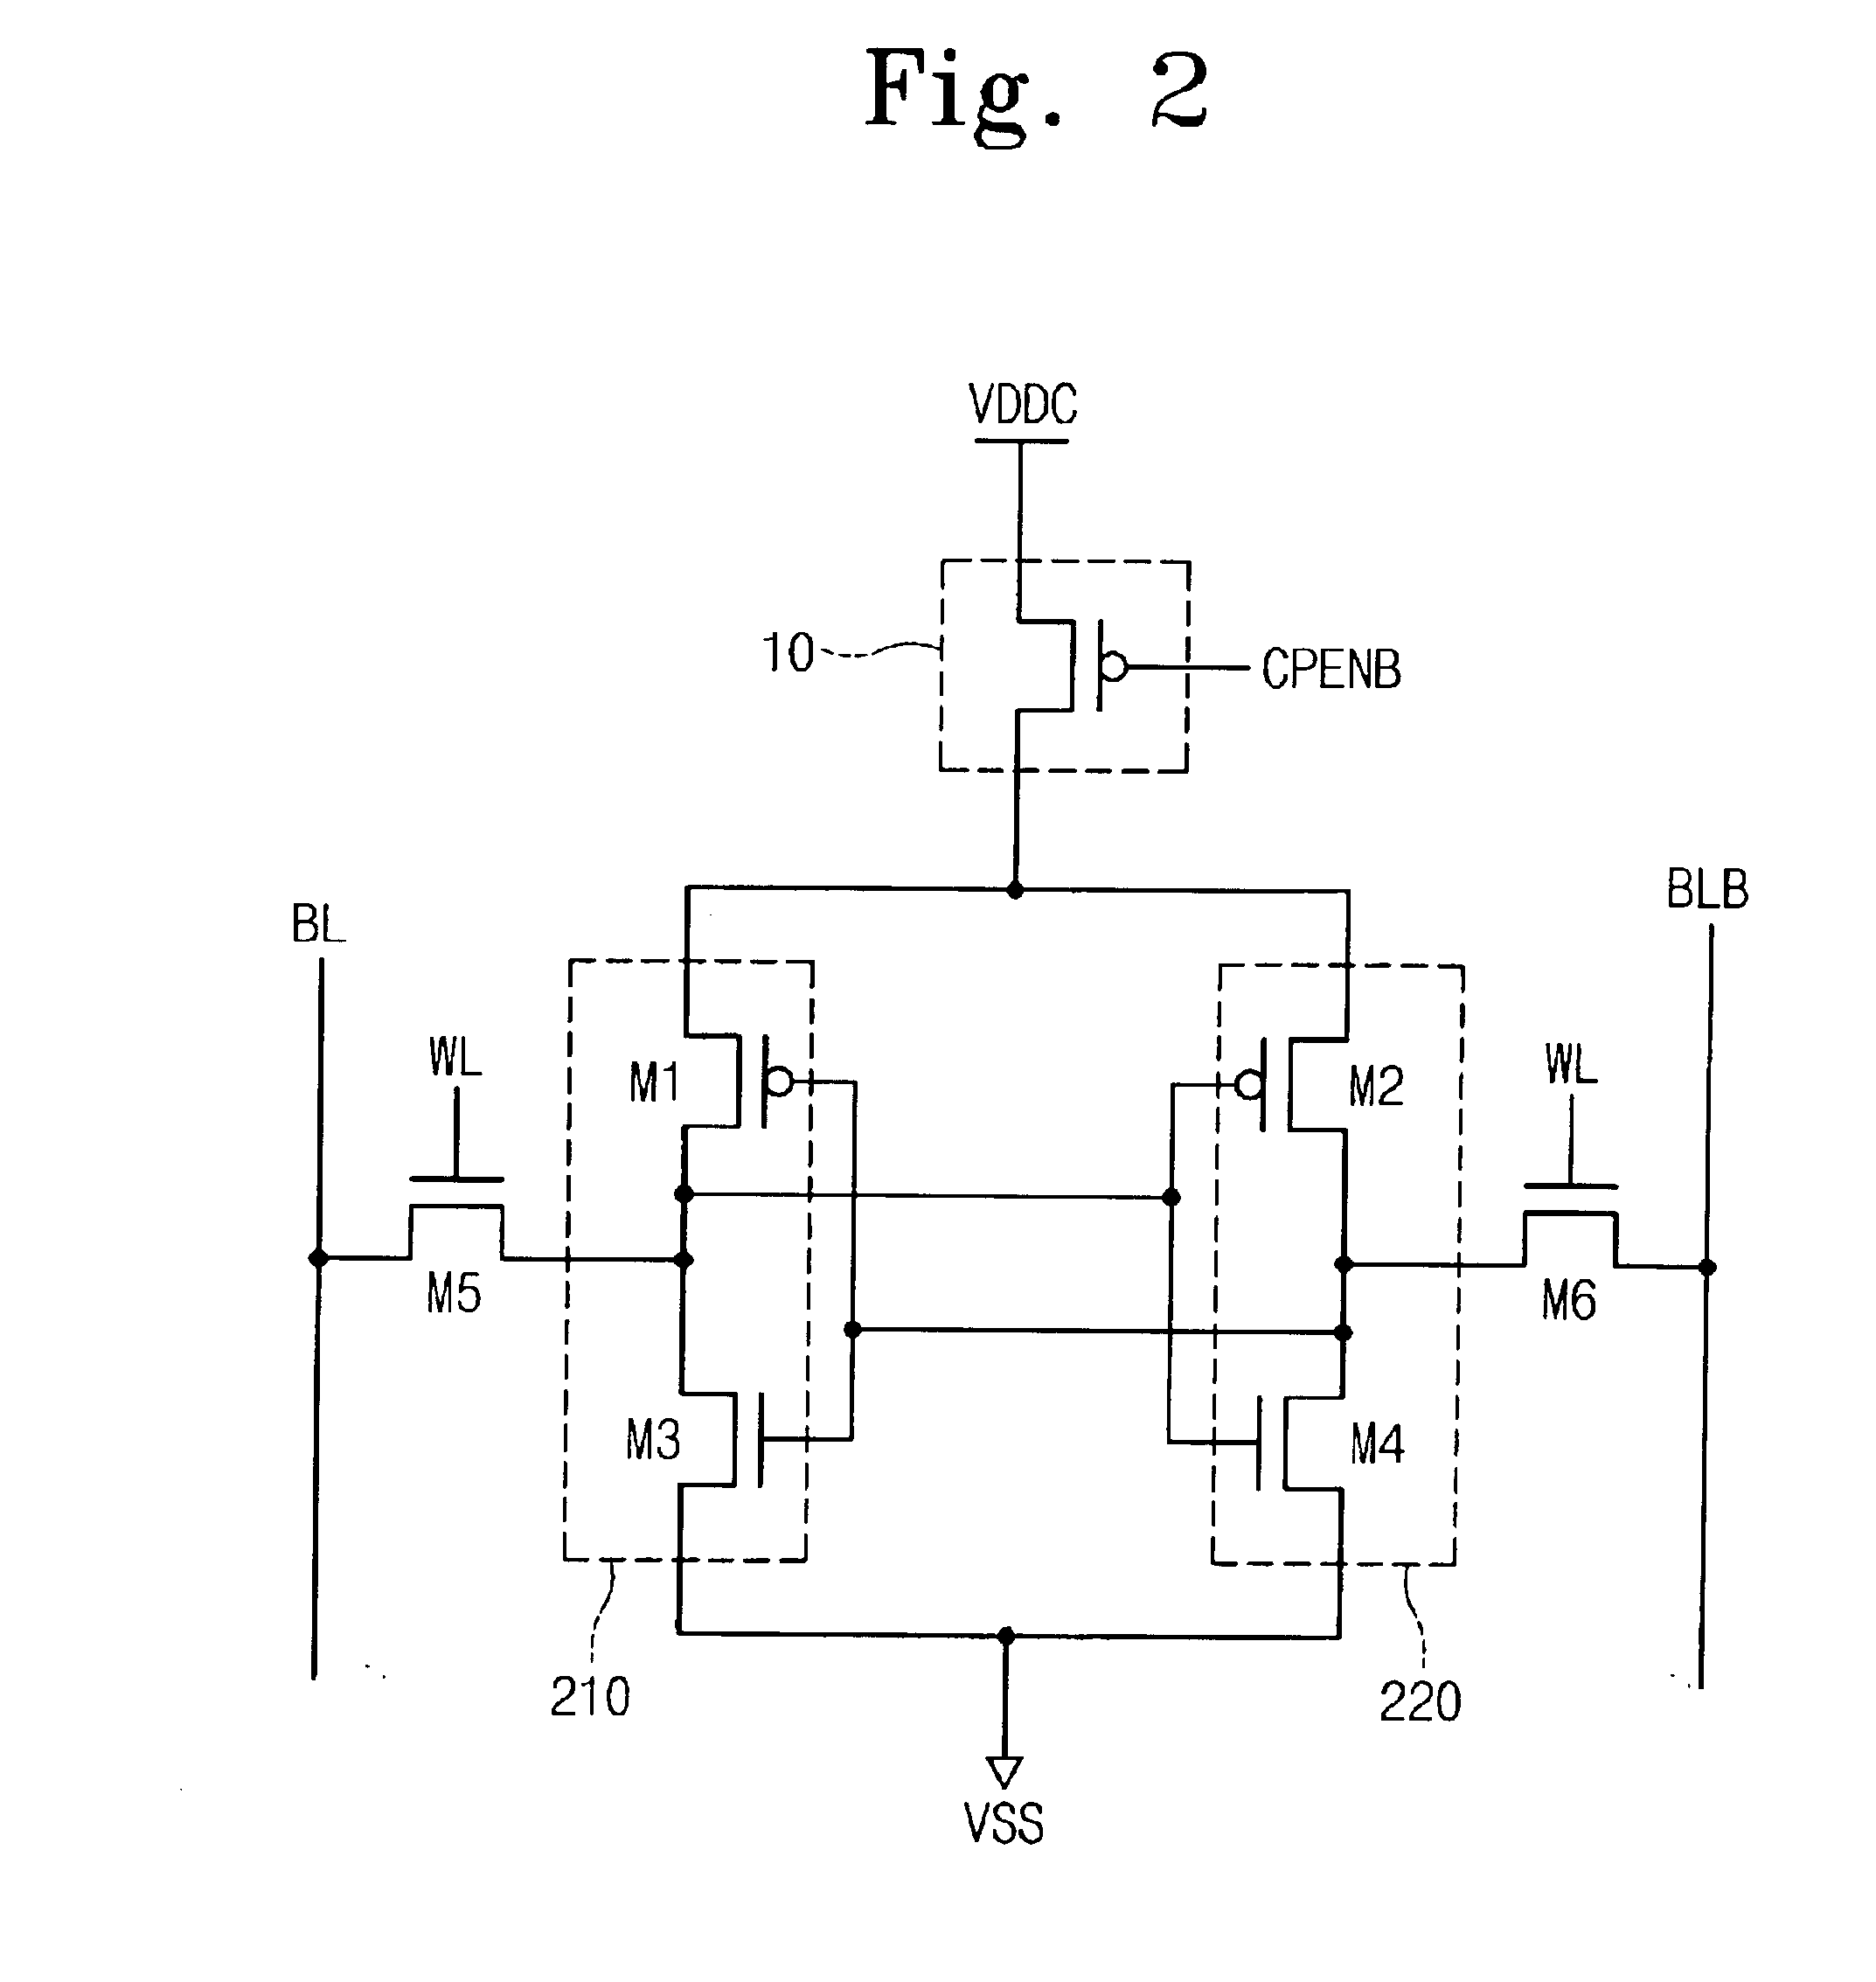 Circuits and methods for screening for defective memory cells in semiconductor memory devices